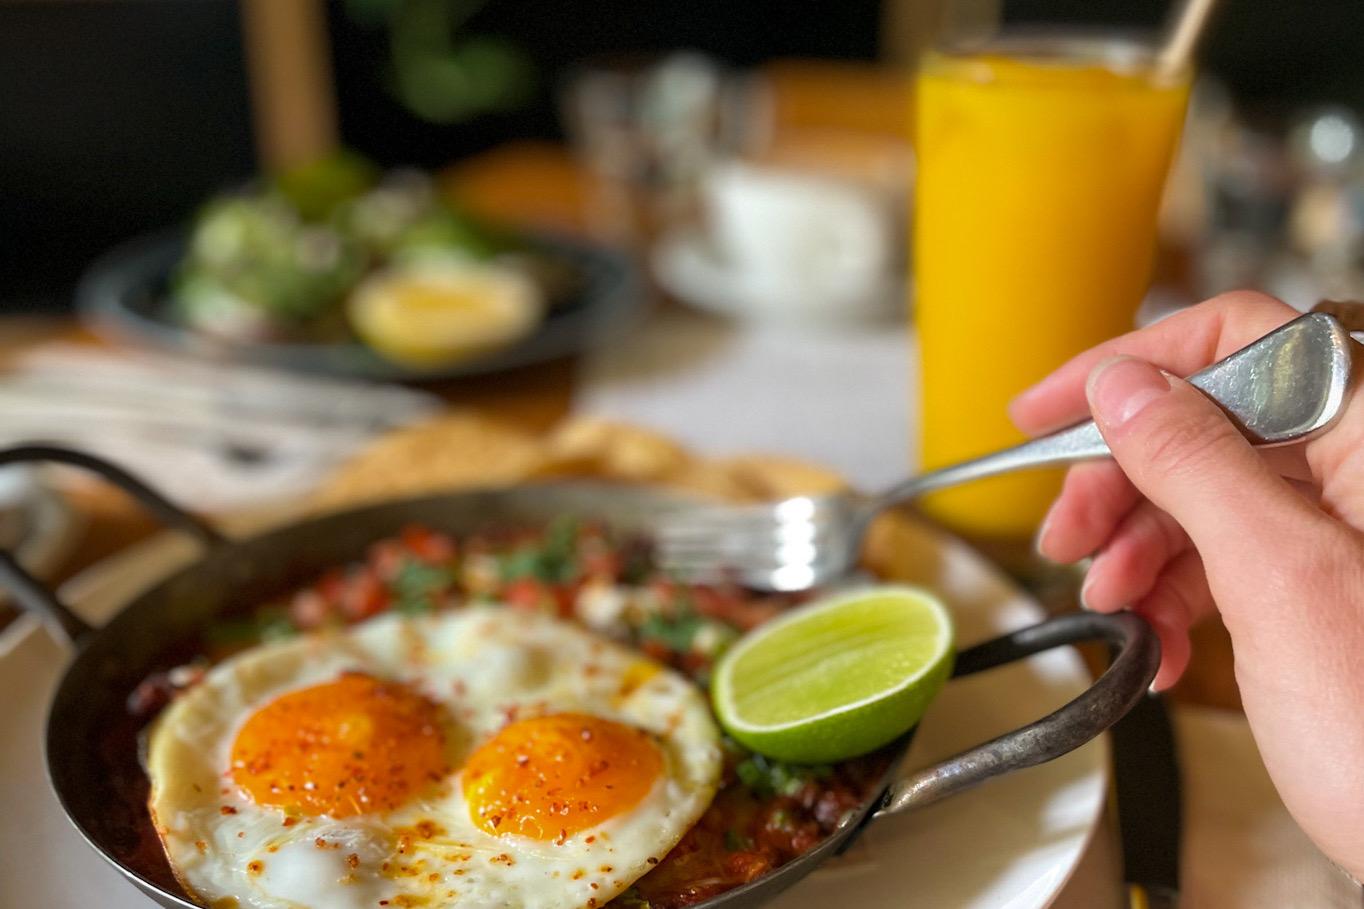 A skillet of Mexican-style baked eggs with a lime slice, two fried eggs, on a cafe table with plants in the background and a glass of fresh orange juice.